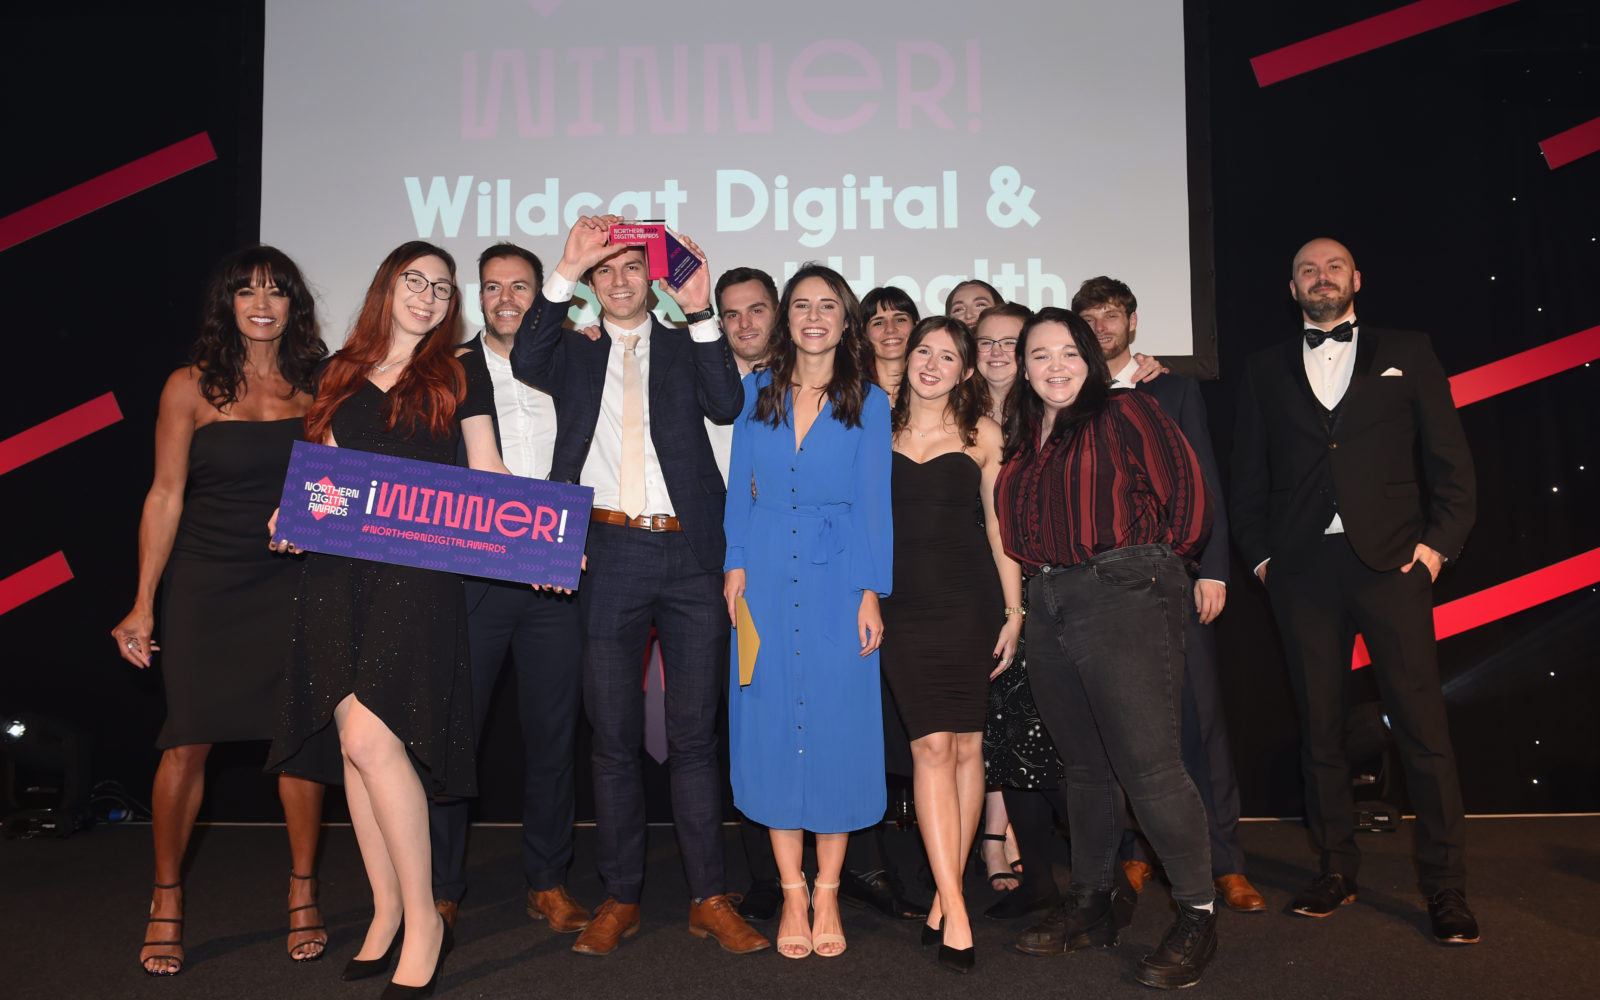 Wildcat Digital team accepting the award for Best Health and Beauty Campaign alongside Jenny Powell